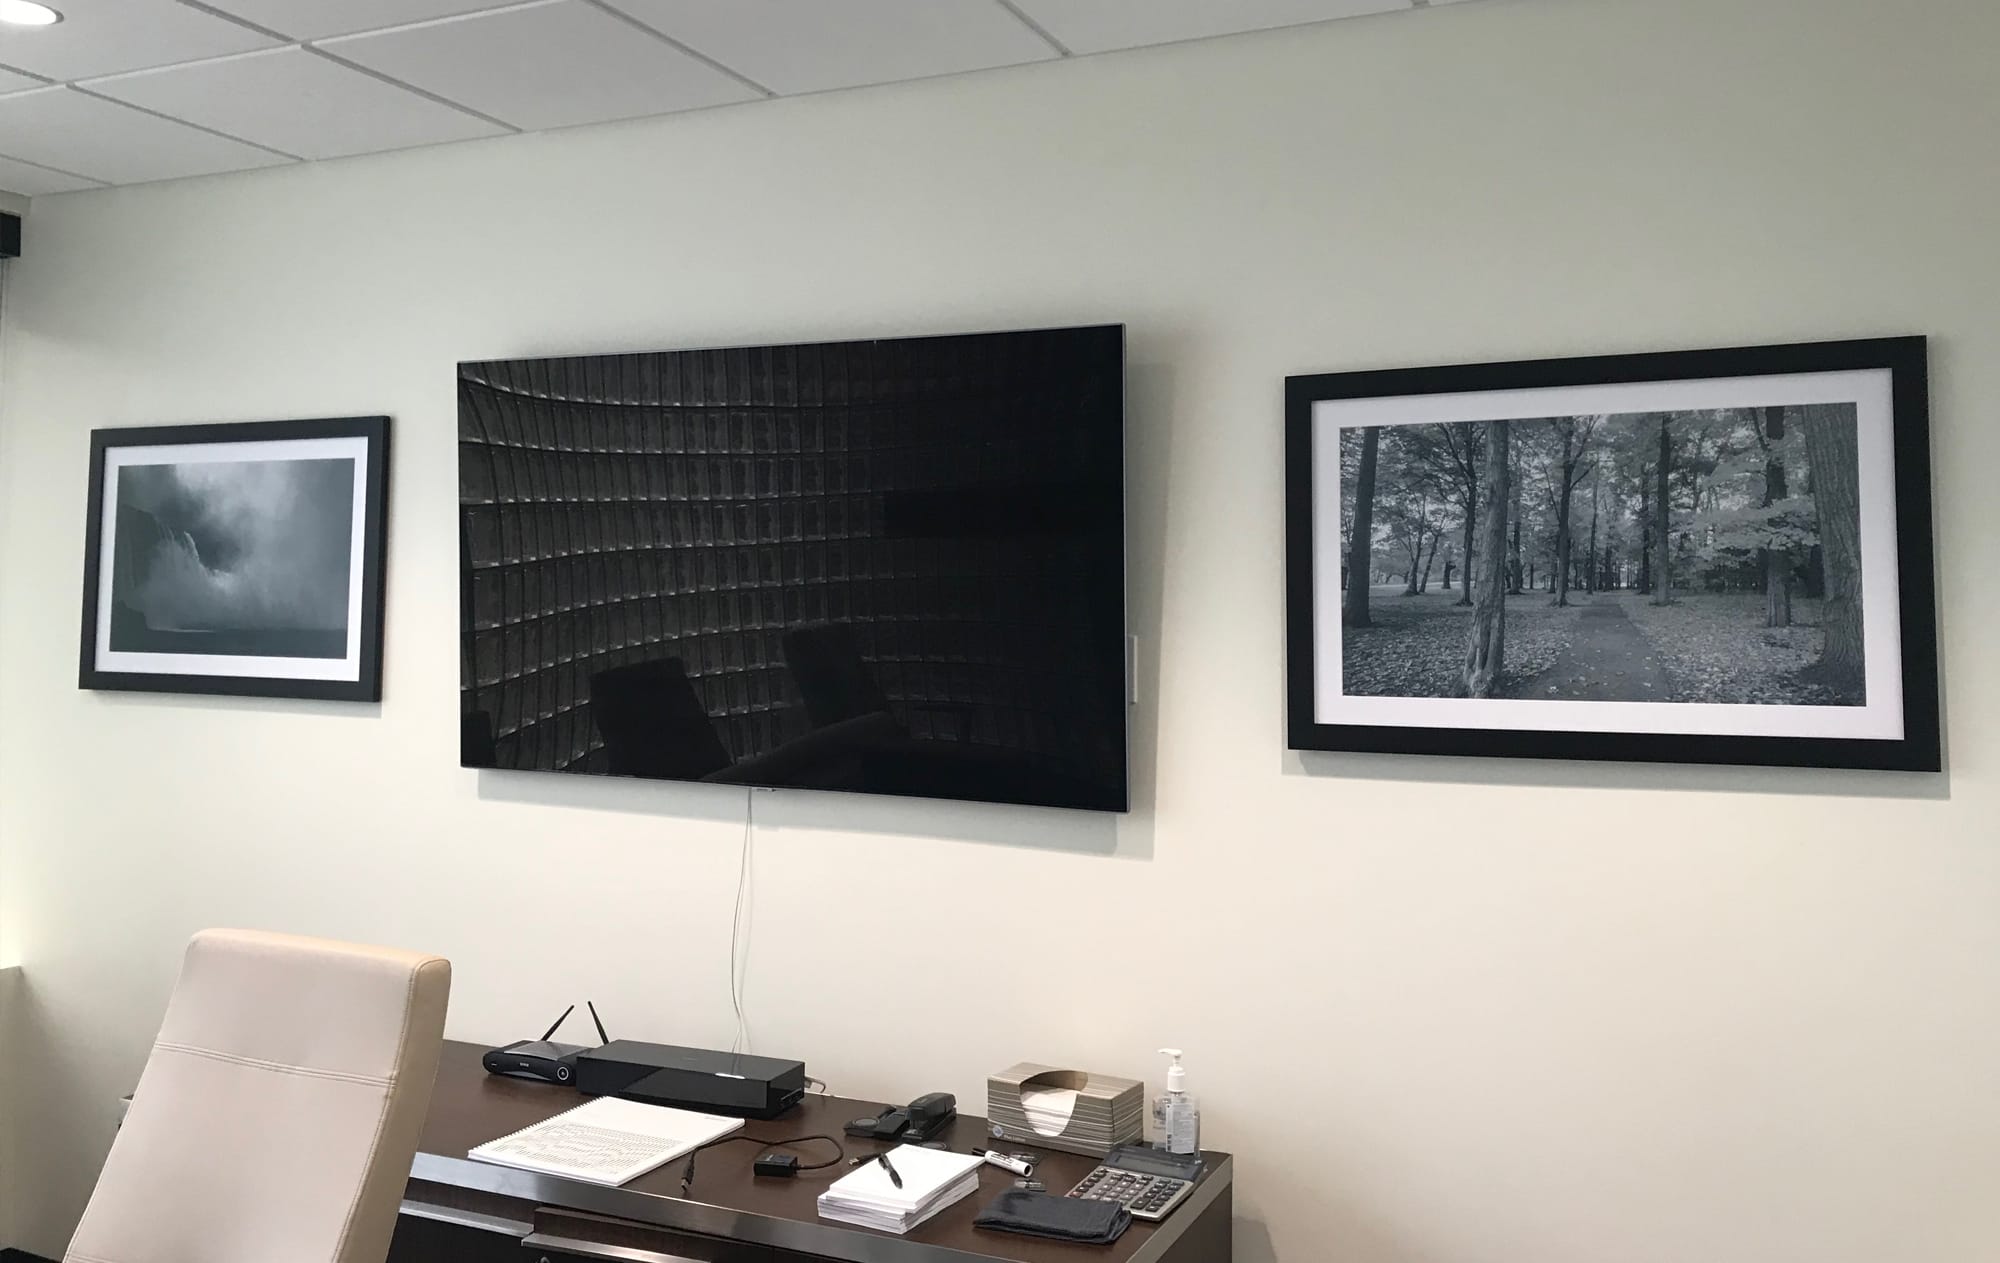 Interior, Prints and Framed Images, Produced and installed Digital print photo with custom frame w/ non-glare glass, Corporate,Ad Art Sign Co., AdArt, Full Service Signage, LED Lighting, Digital Signage,